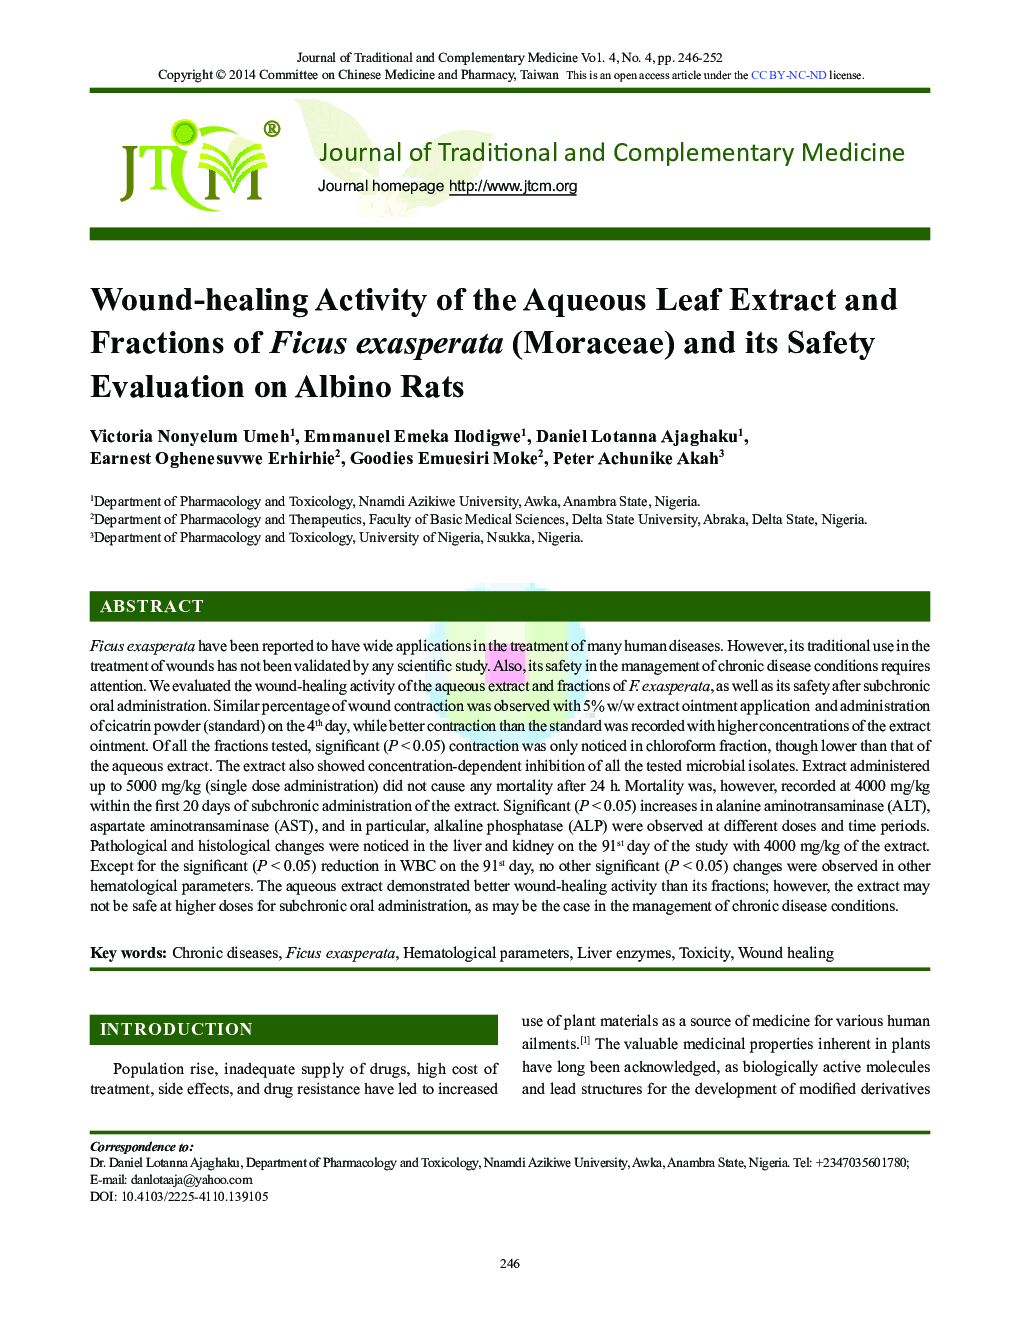 Wound-healing Activity of the Aqueous Leaf Extract and Fractions of Ficus exasperata (Moraceae) and its Safety Evaluation on Albino Rats